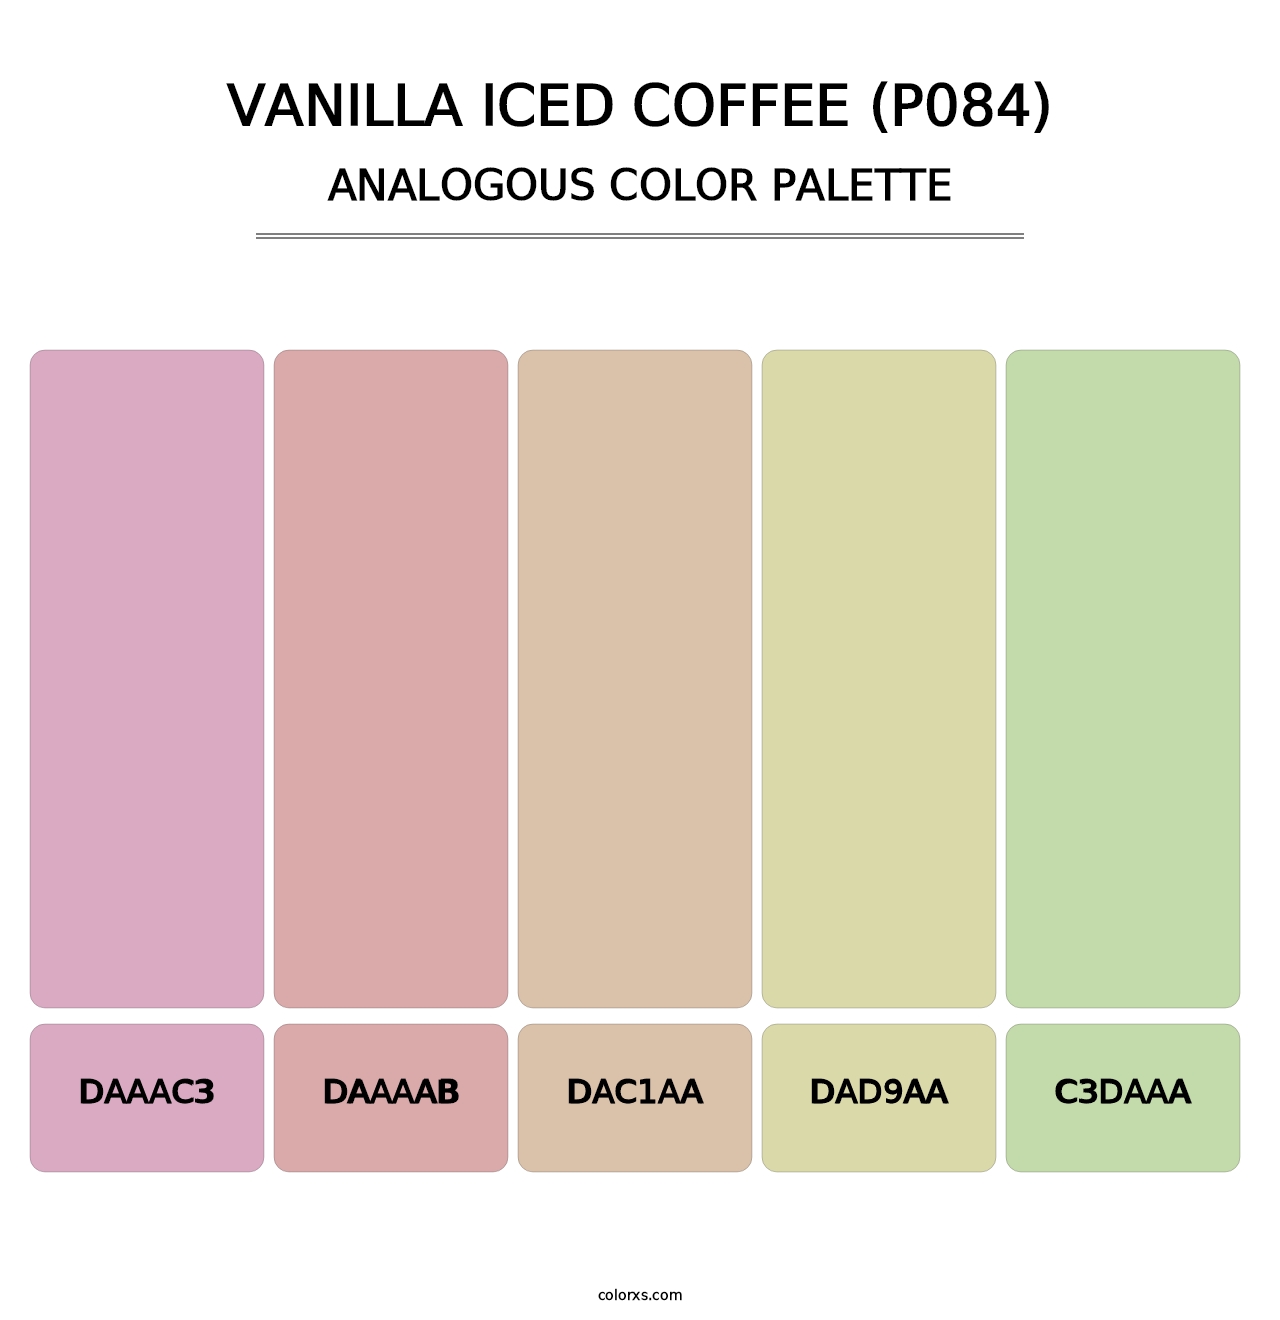 Vanilla Iced Coffee (P084) - Analogous Color Palette